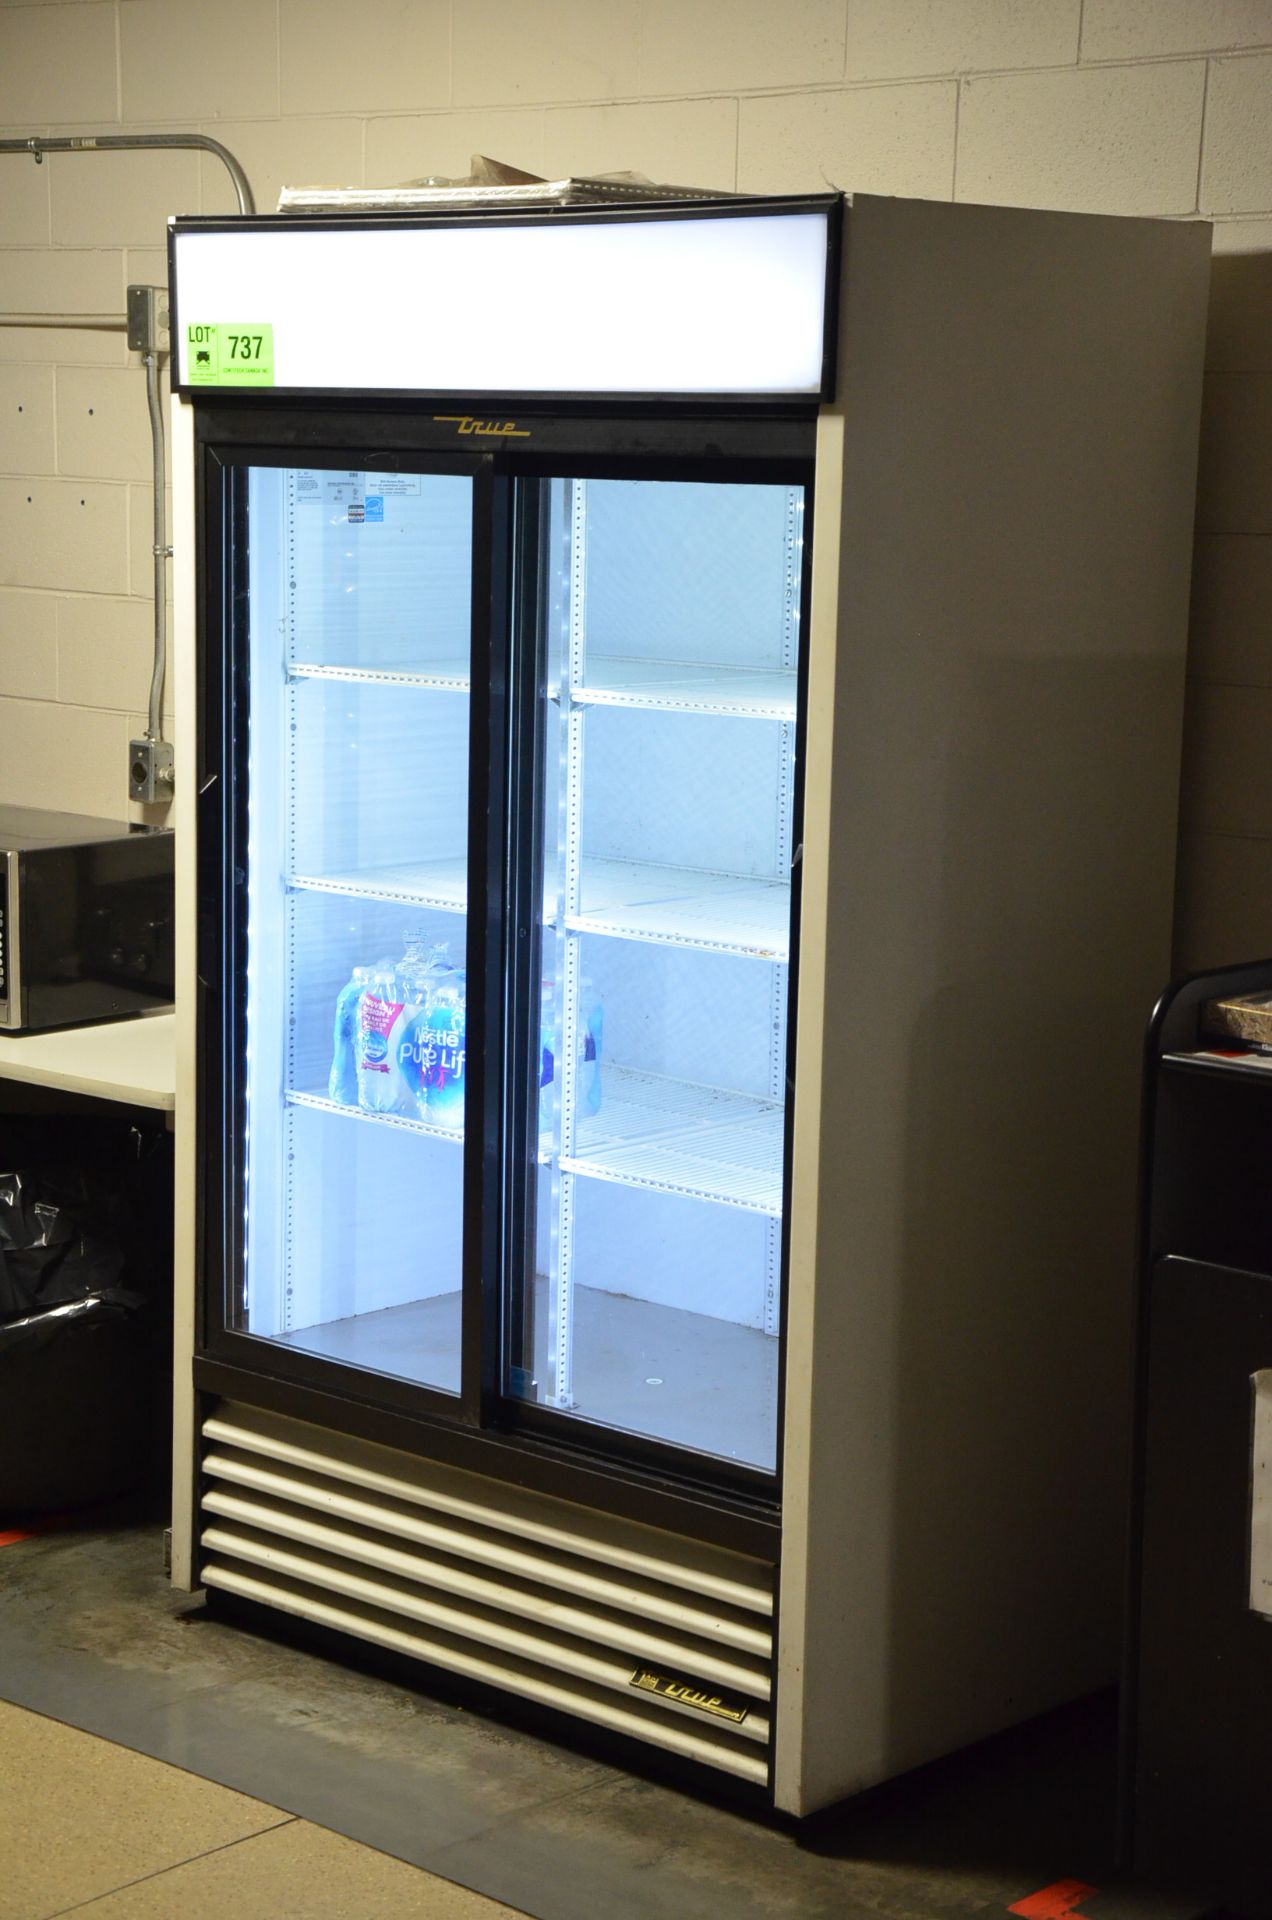 TRUE GLASS DOOR FRIDGE, S/N N/A [RIGGING FEE FOR LOT #737 - $tbd USD PLUS APPLICABLE TAXES]